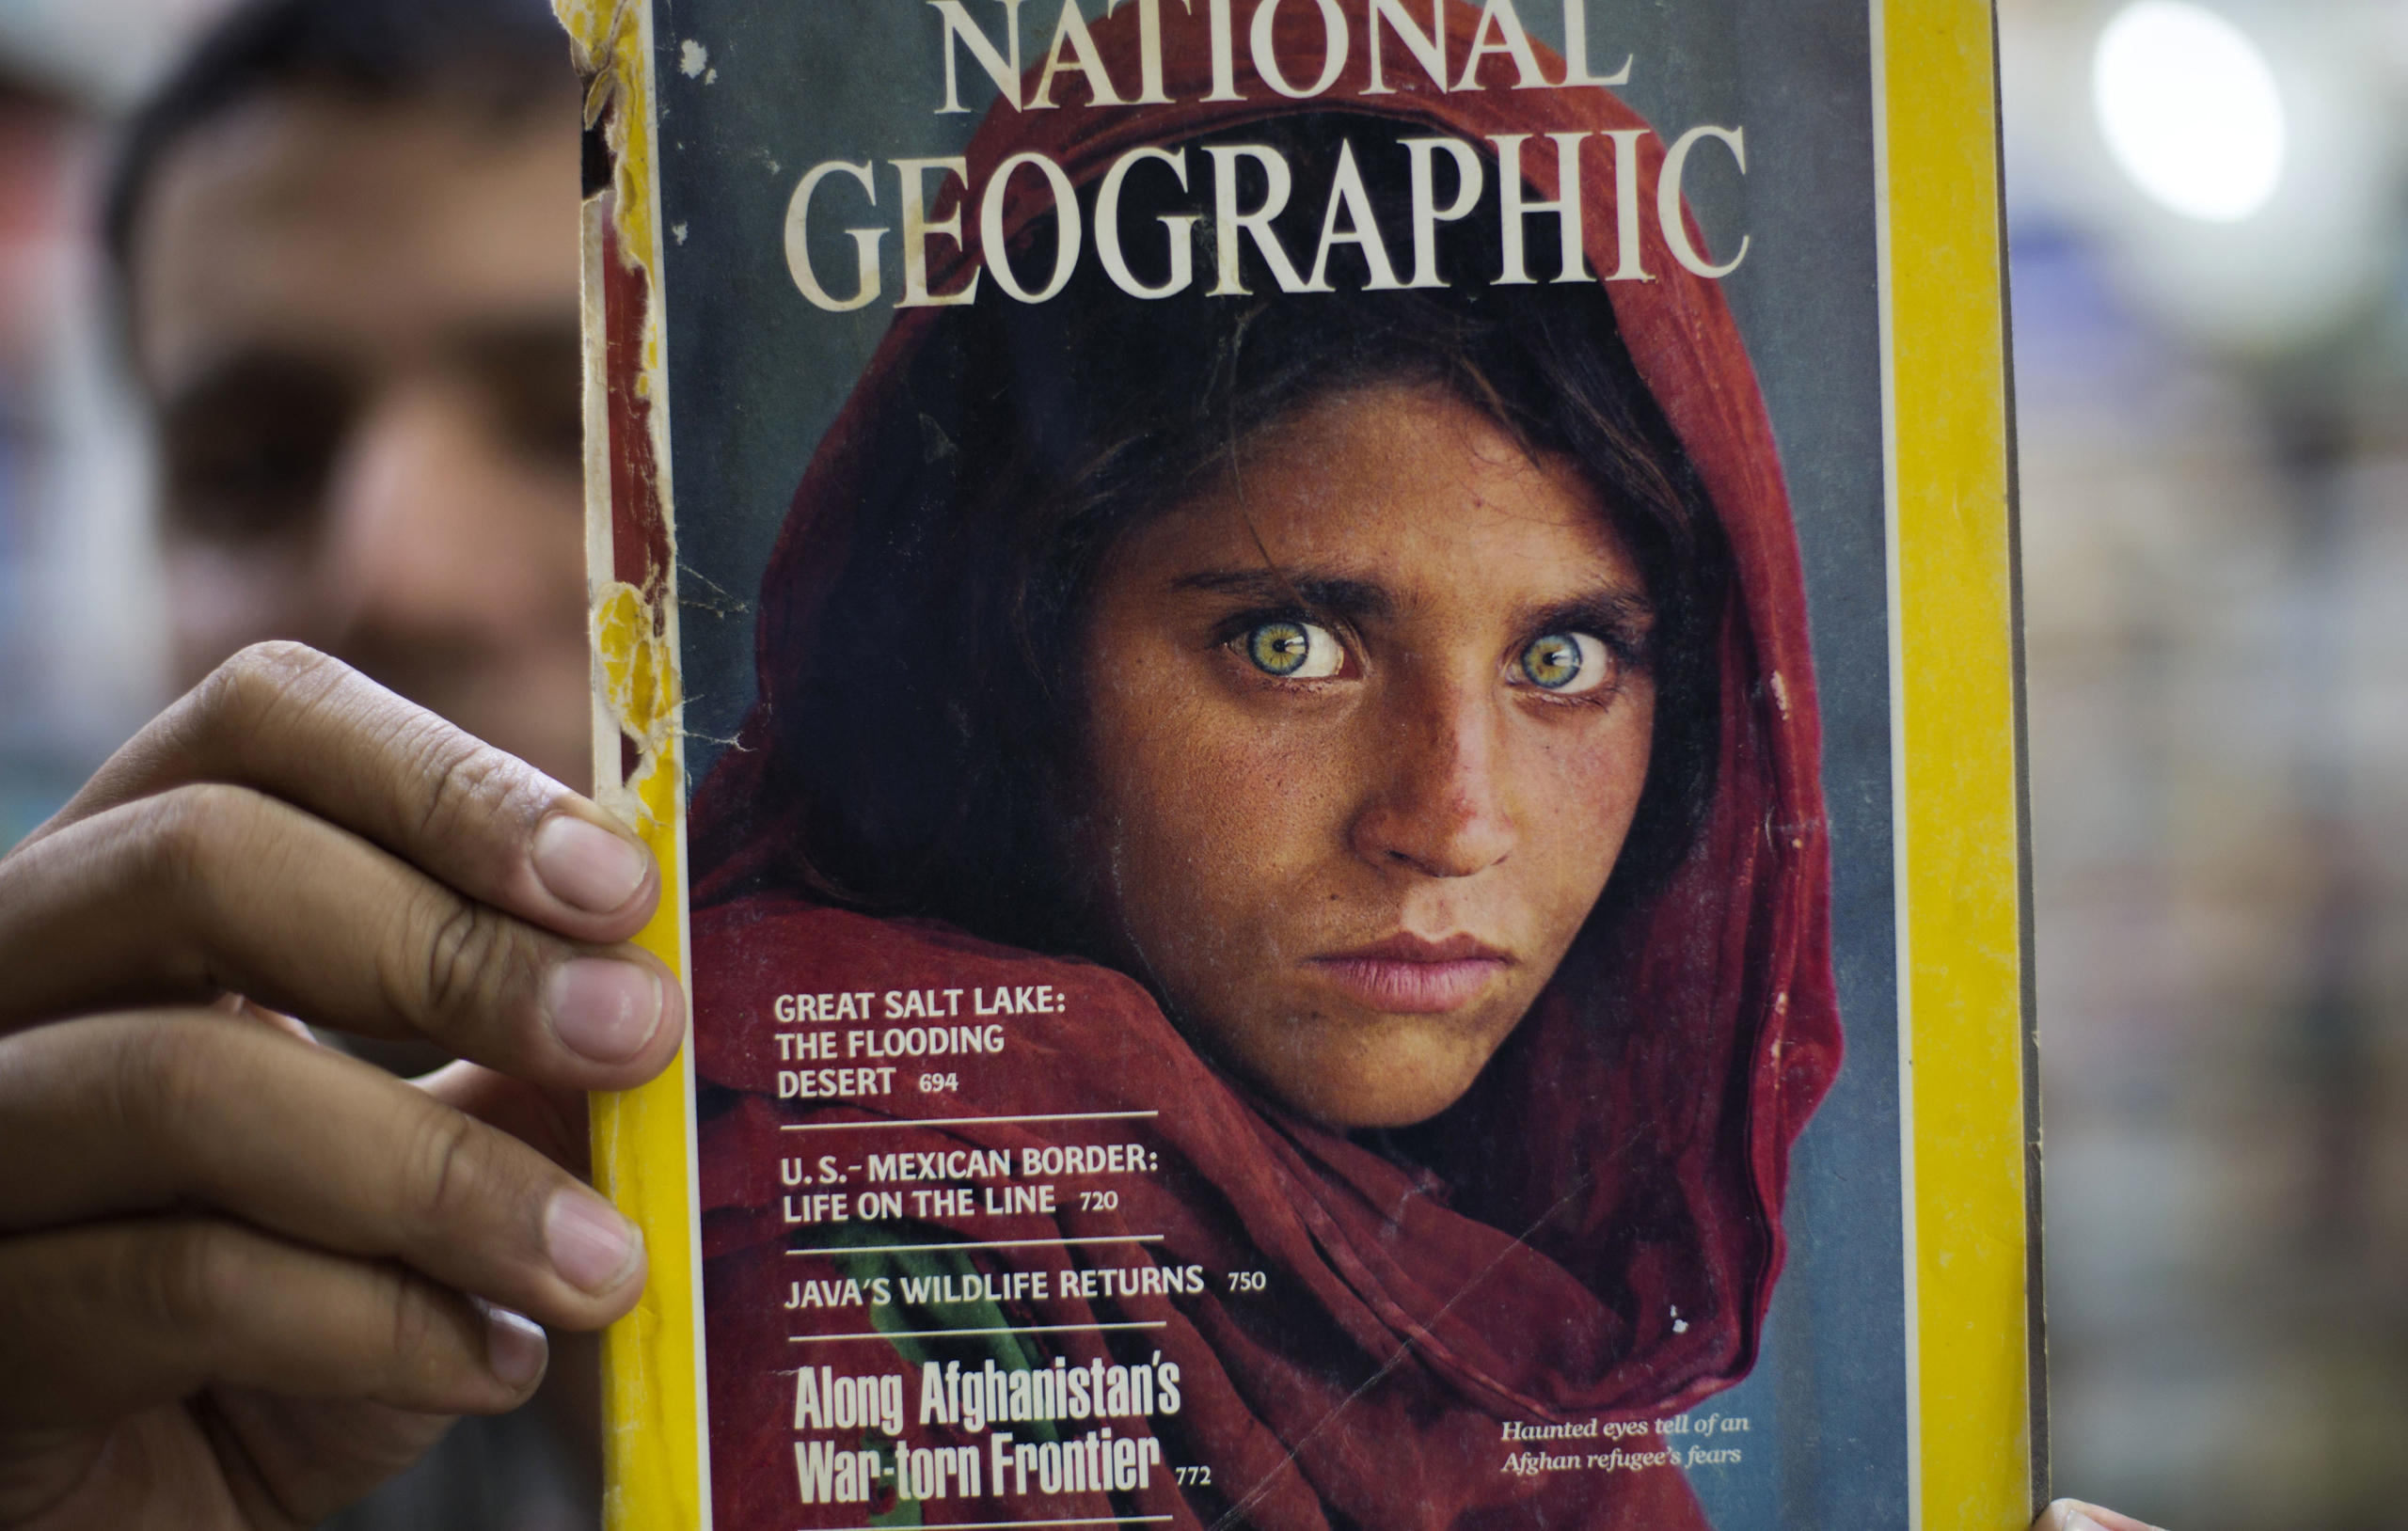 Pakistan's Inam Khan, owner of a book shop shows a copy of a magazine  with the photograph of Afghan refugee woman Sharbat Gulla, from his rare collection in Islamabad, Pakistan, on, Oct. 26, 2016. A Pakistani investigator says the police have arrested National Geographic's famed green-eyed 'Afghan Girl' for having a fake Pakistani identity card. (B.K. Bangash—AP)